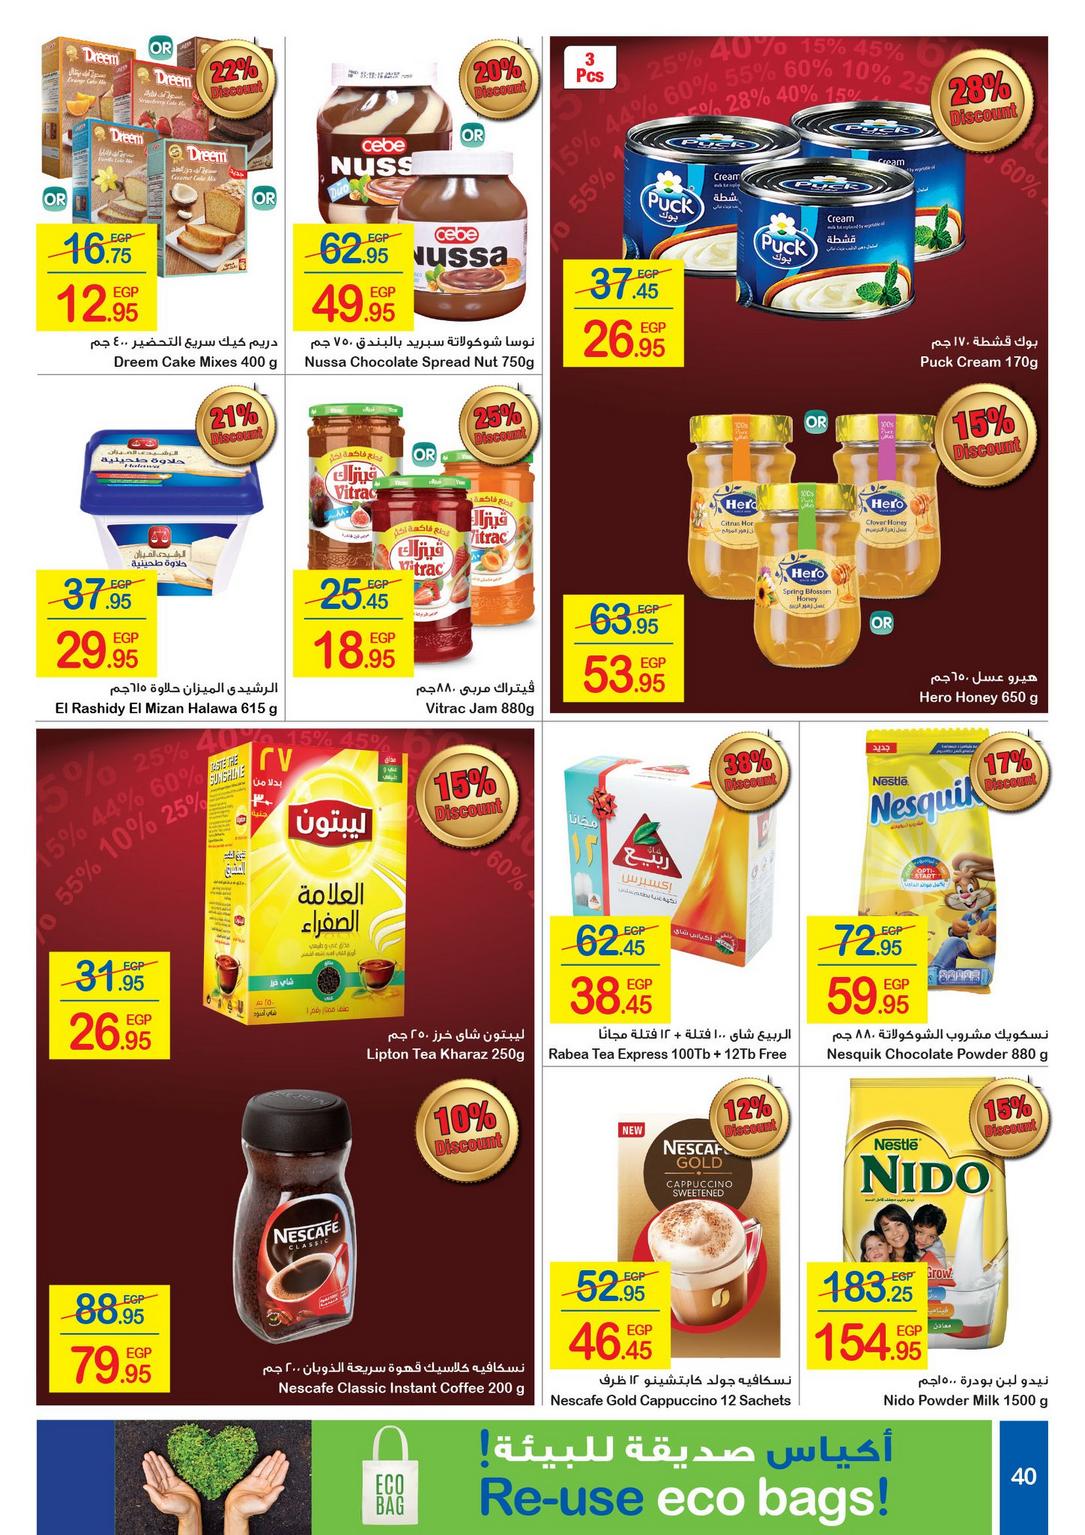 Carrefour Deals from 1/1 till 14/1 | Carrefour Egypt 41